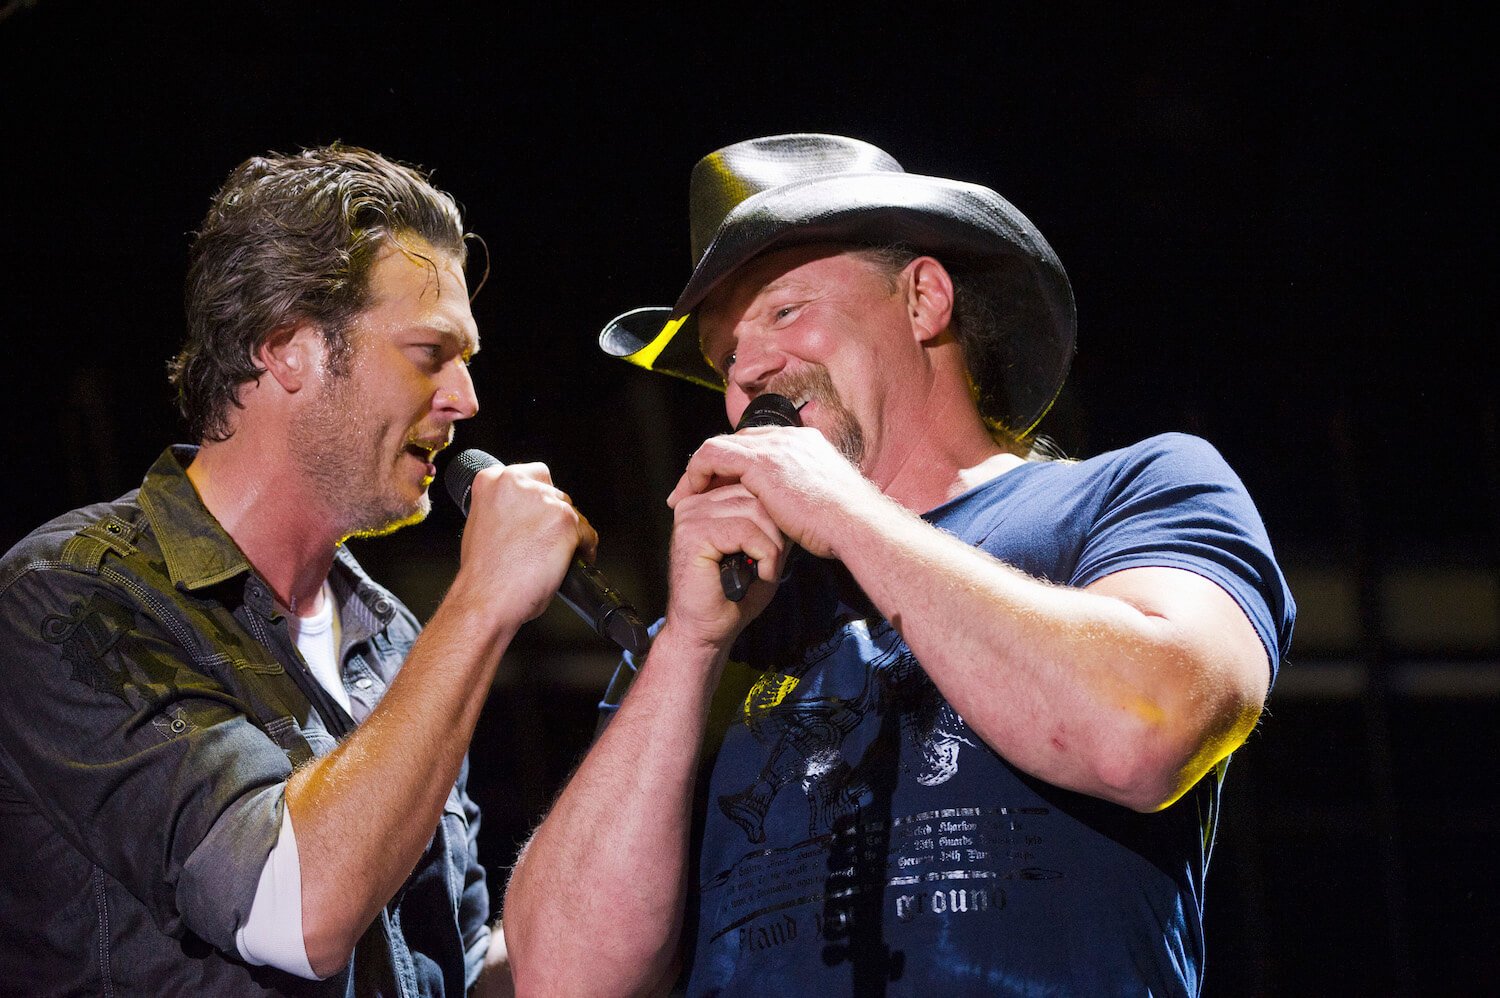 Country singers Blake Shelton and Trace Adkins sweating and singing next to each other on stage